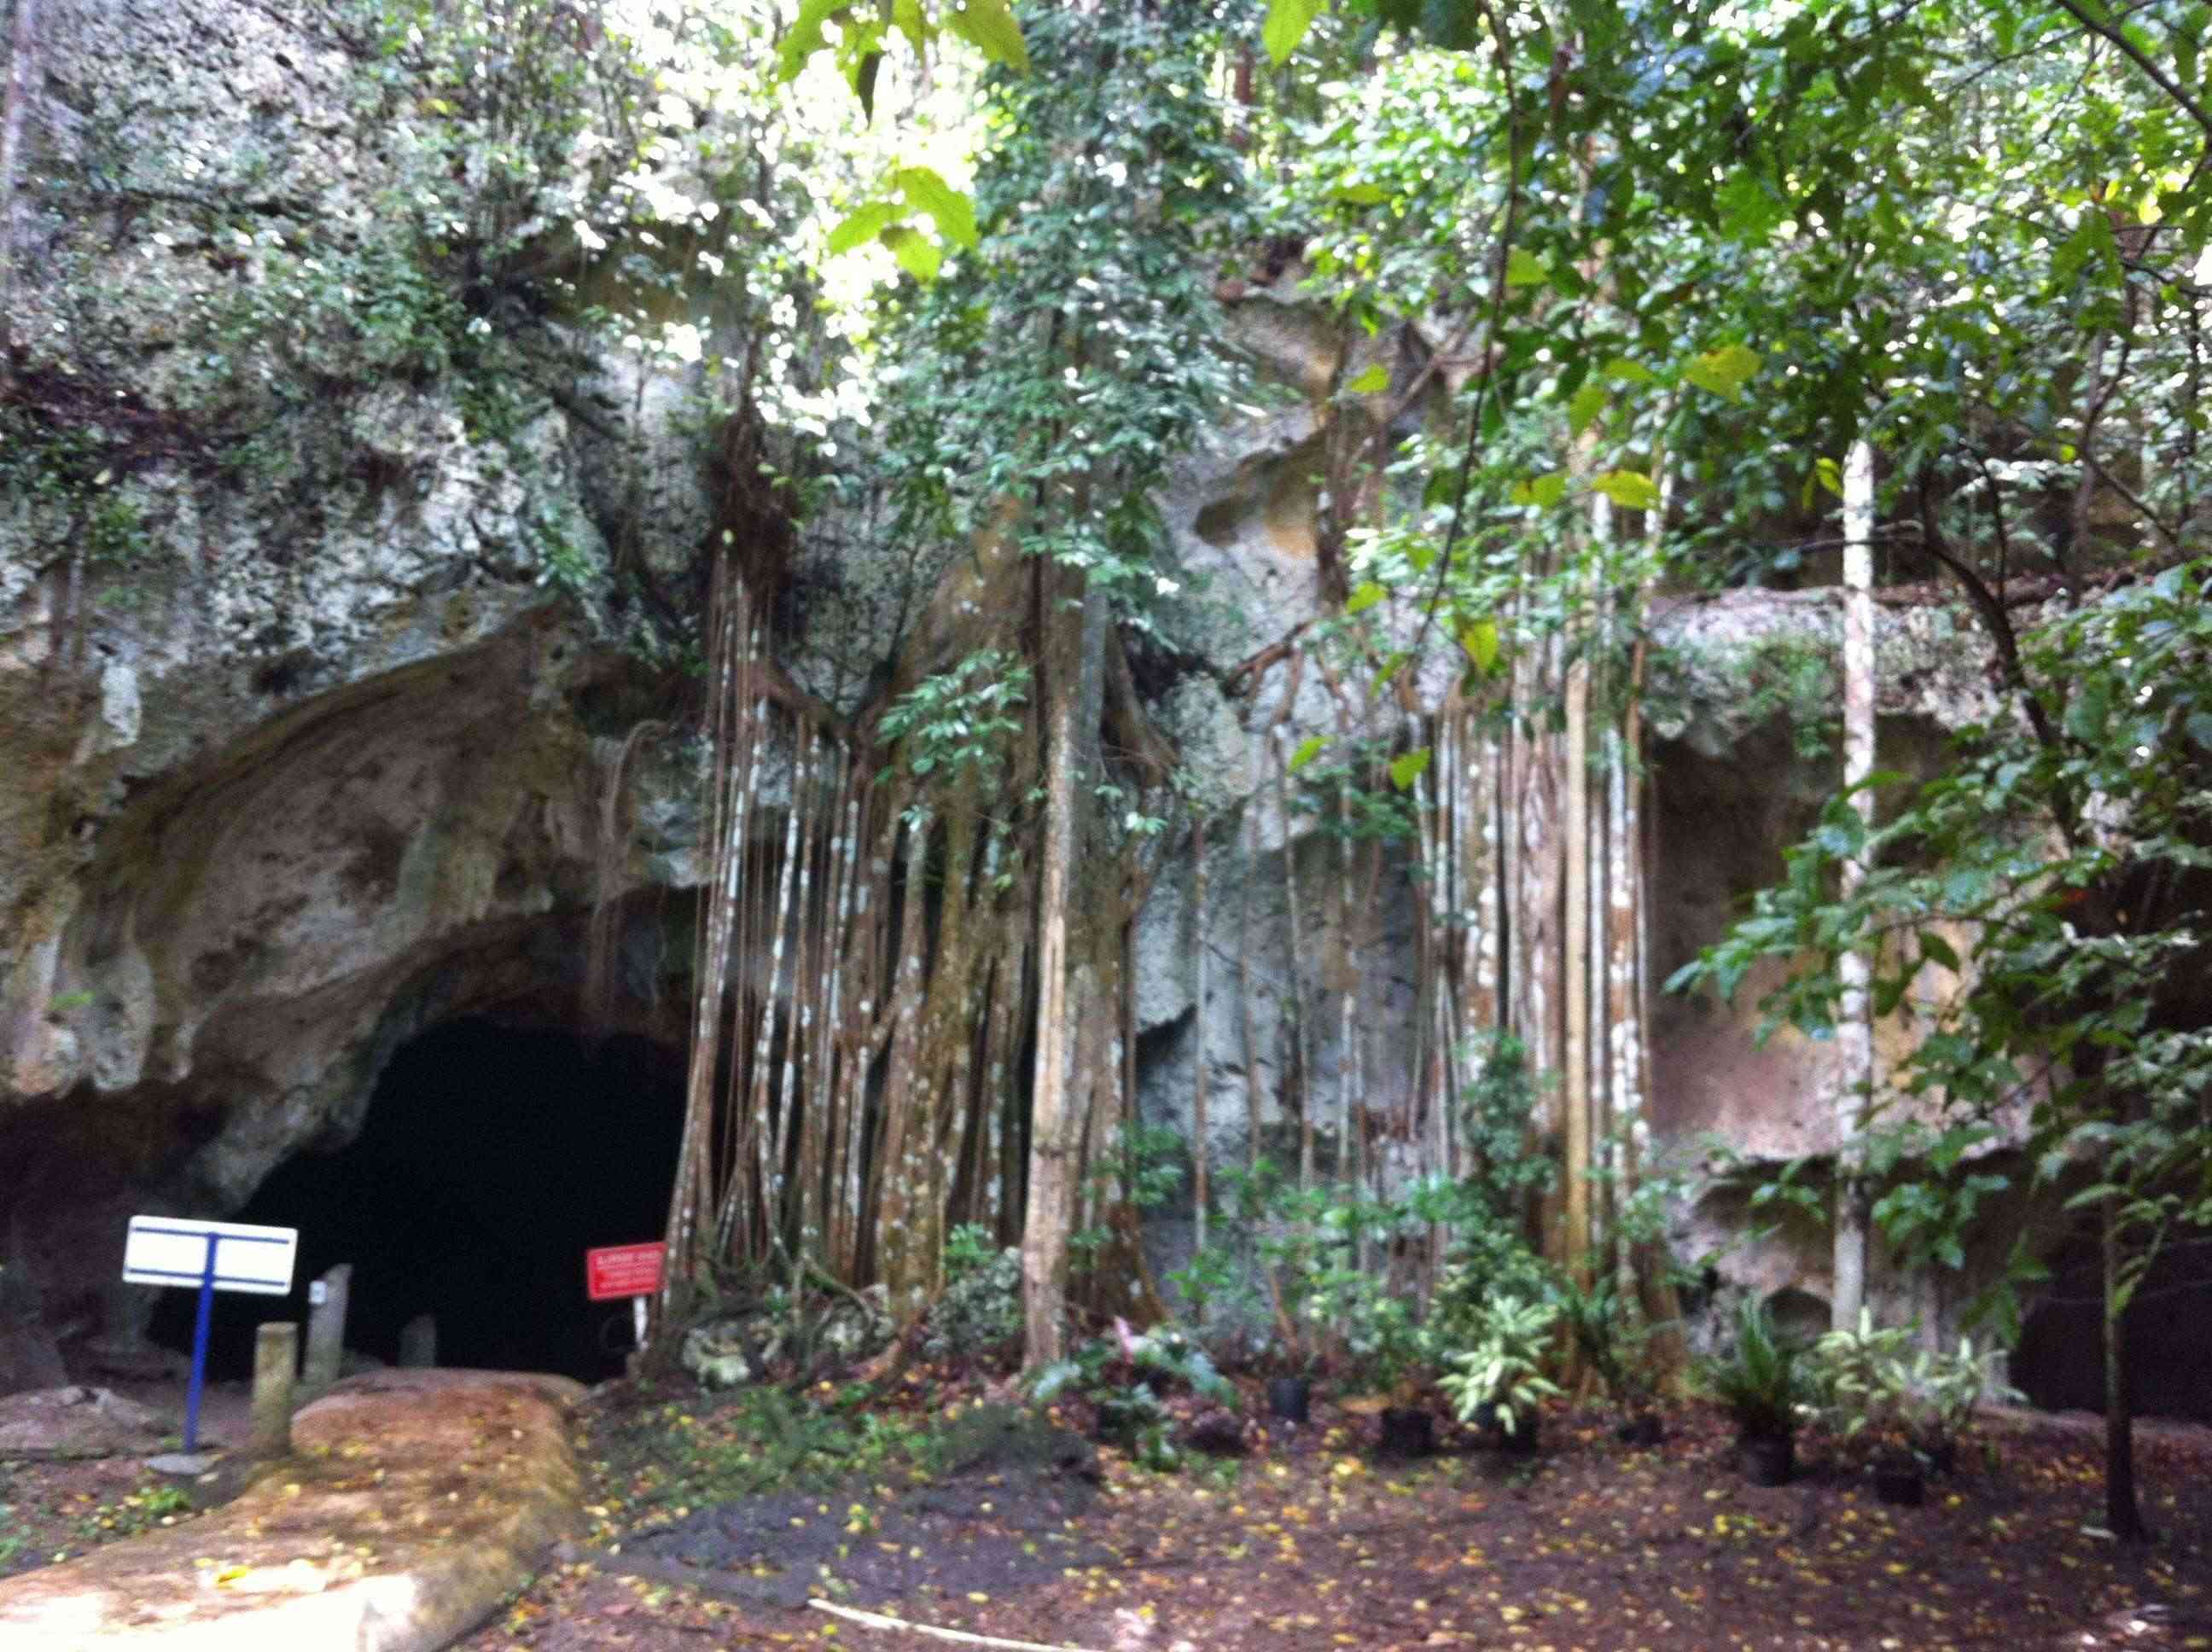 Entrance to Green grotto